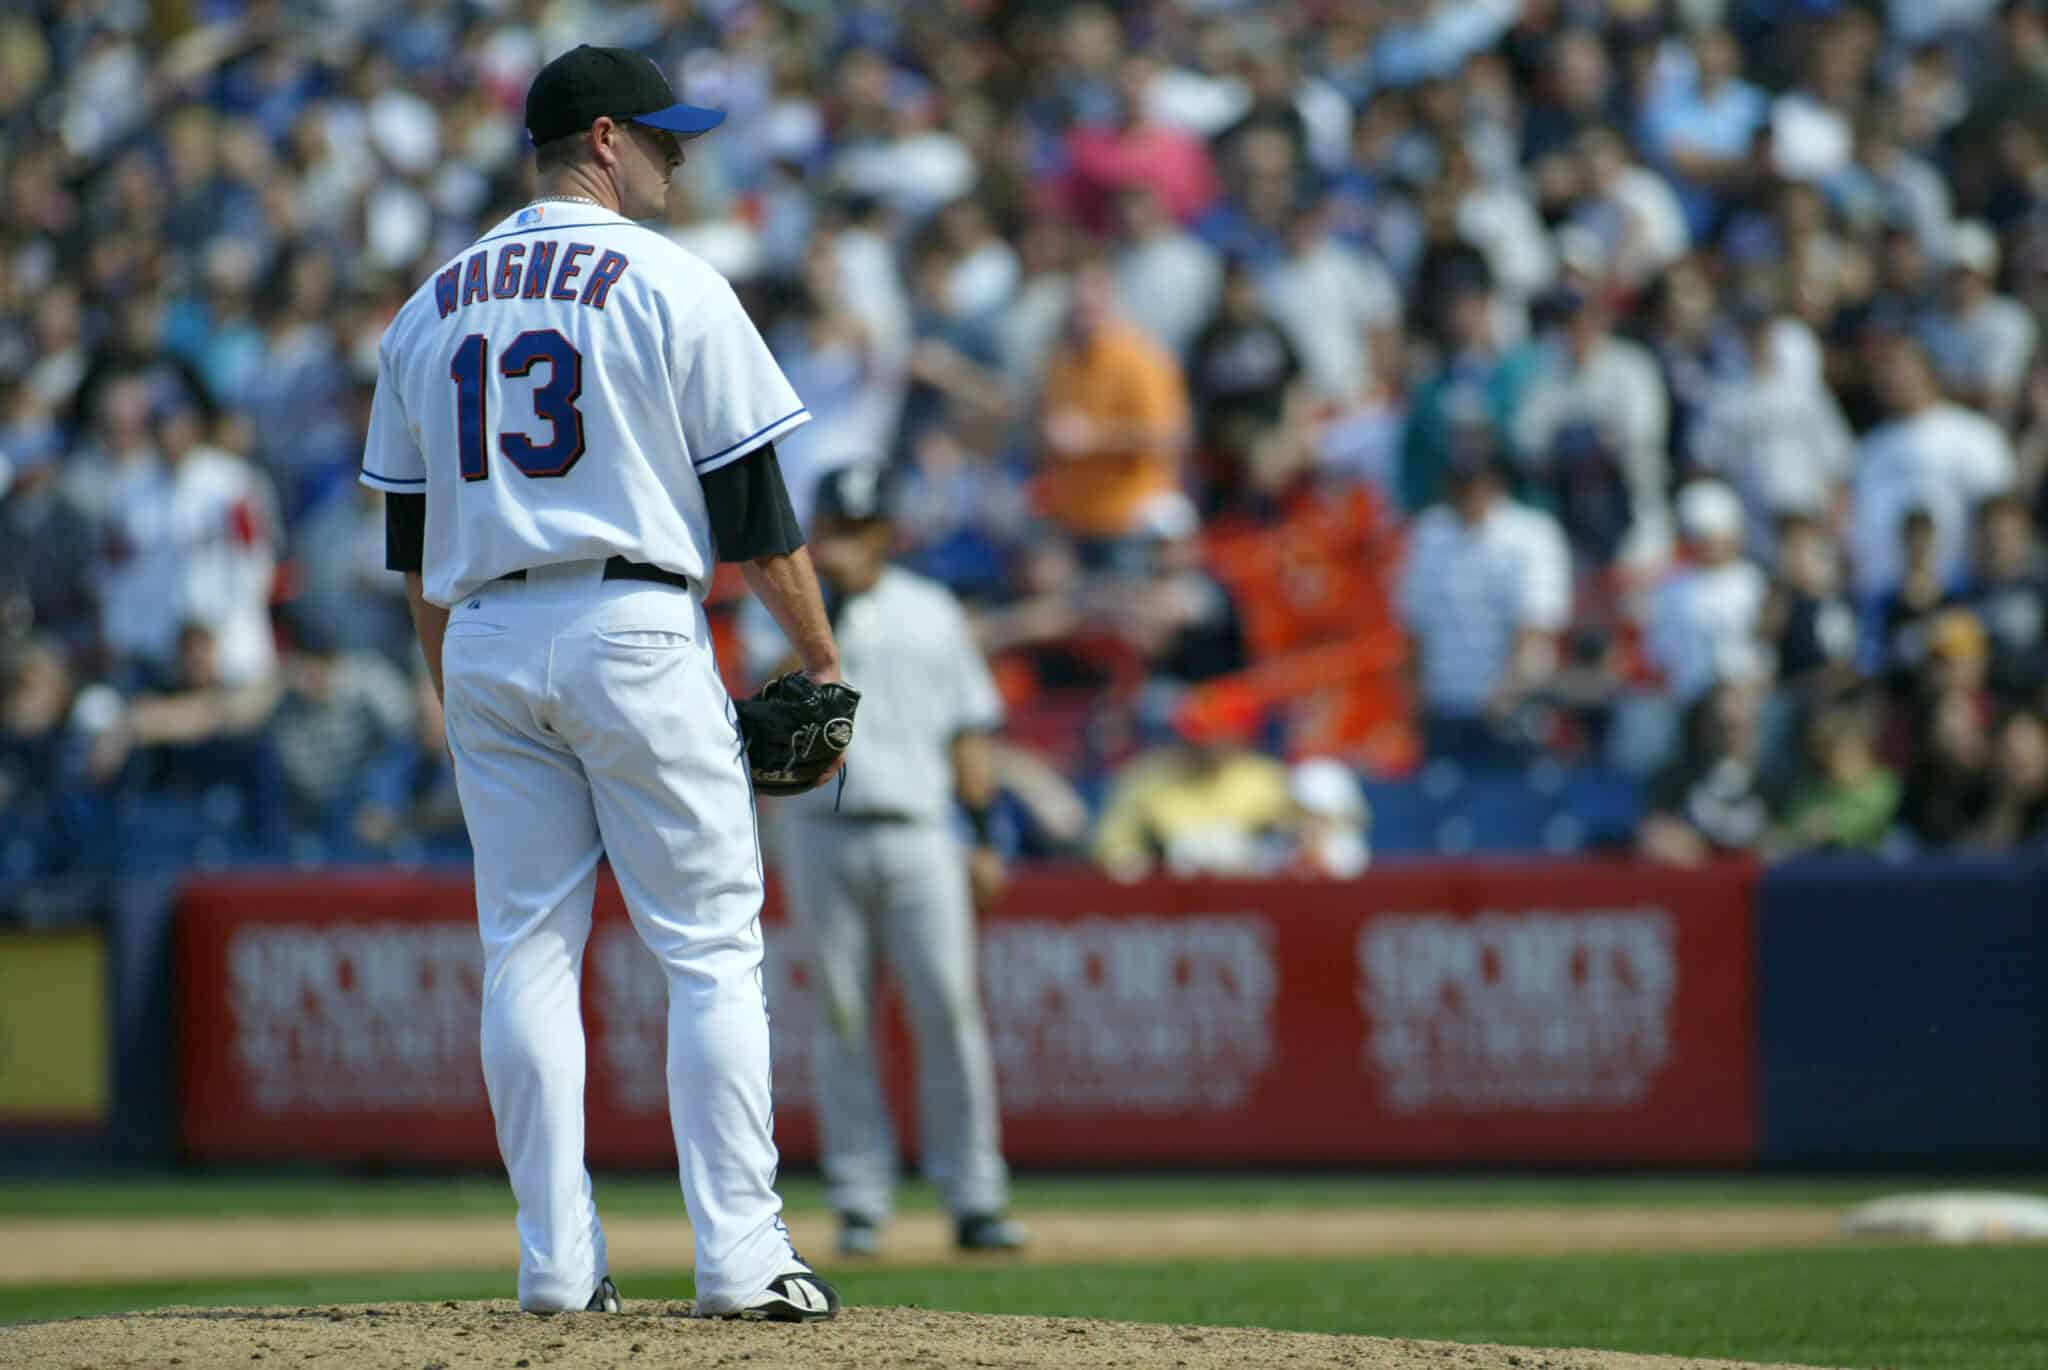 Billy Wagner's Hall of Fame case